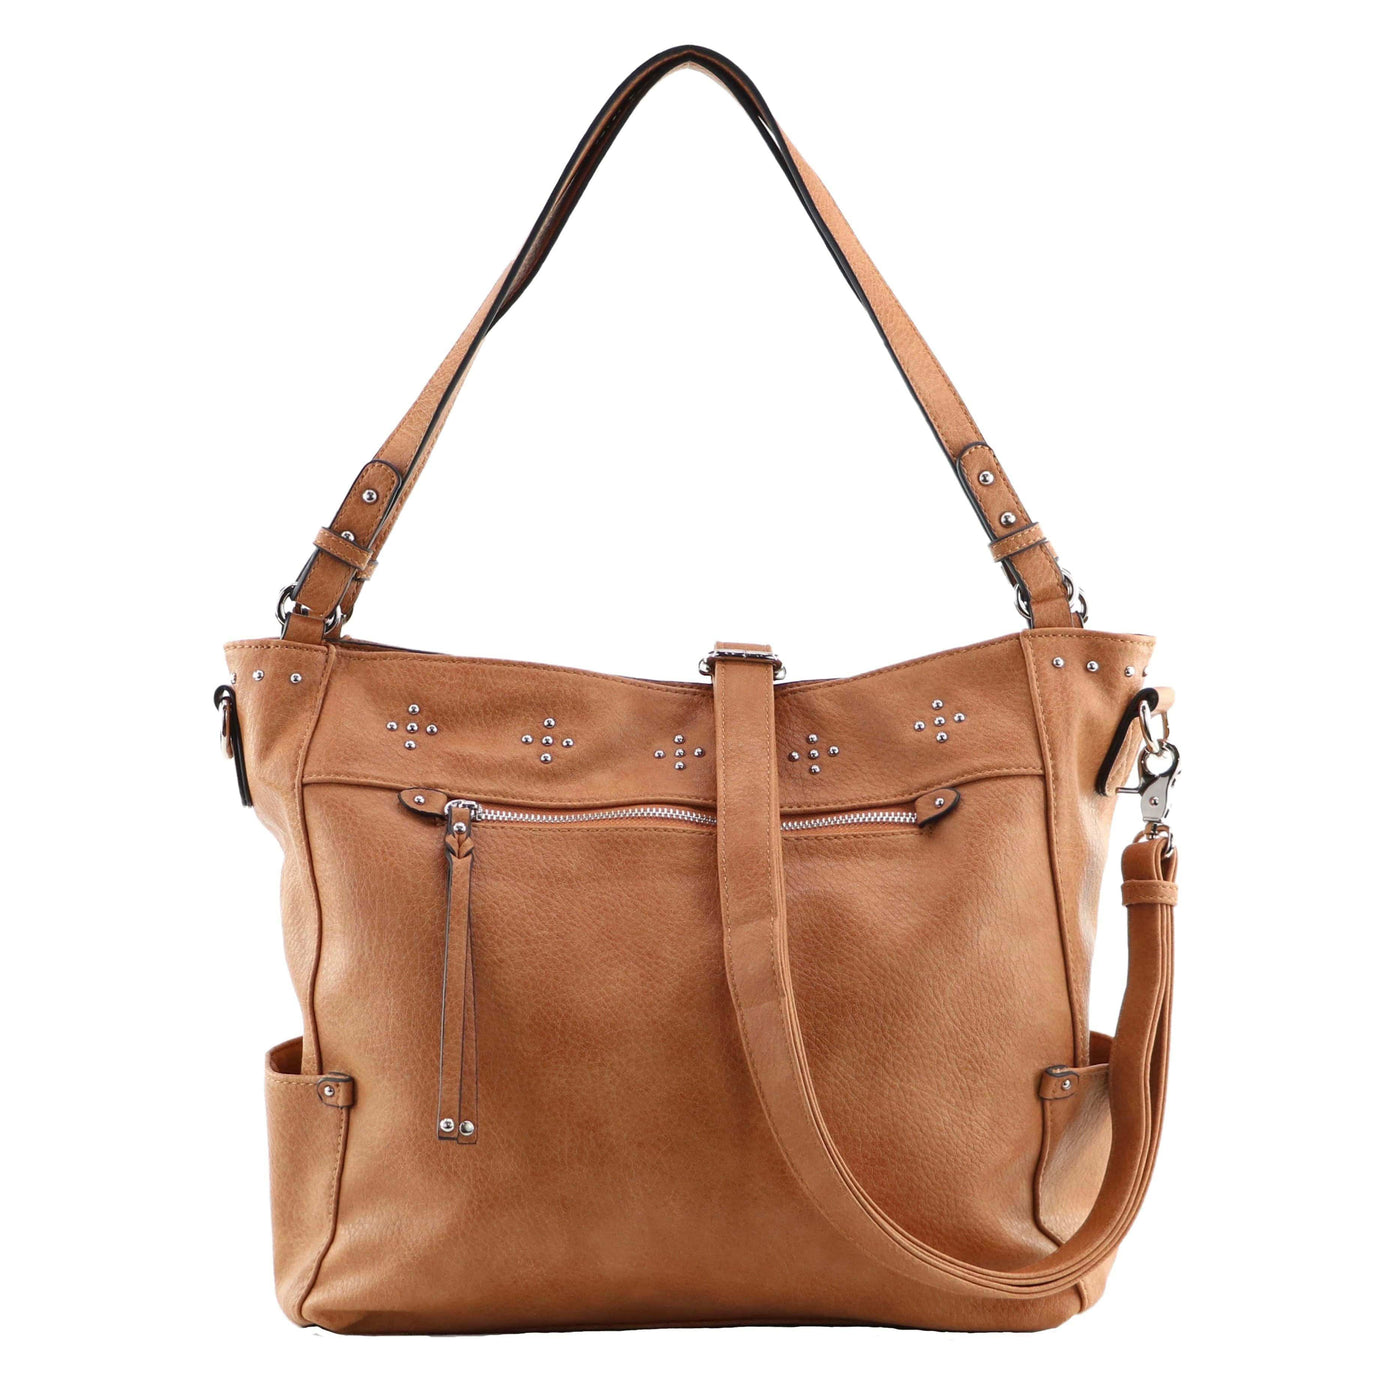 Lady Conceal Concealed Carry Purse Mahogany Concealed Carry Brooklyn Tote Bag - Brown by Lady Conceal